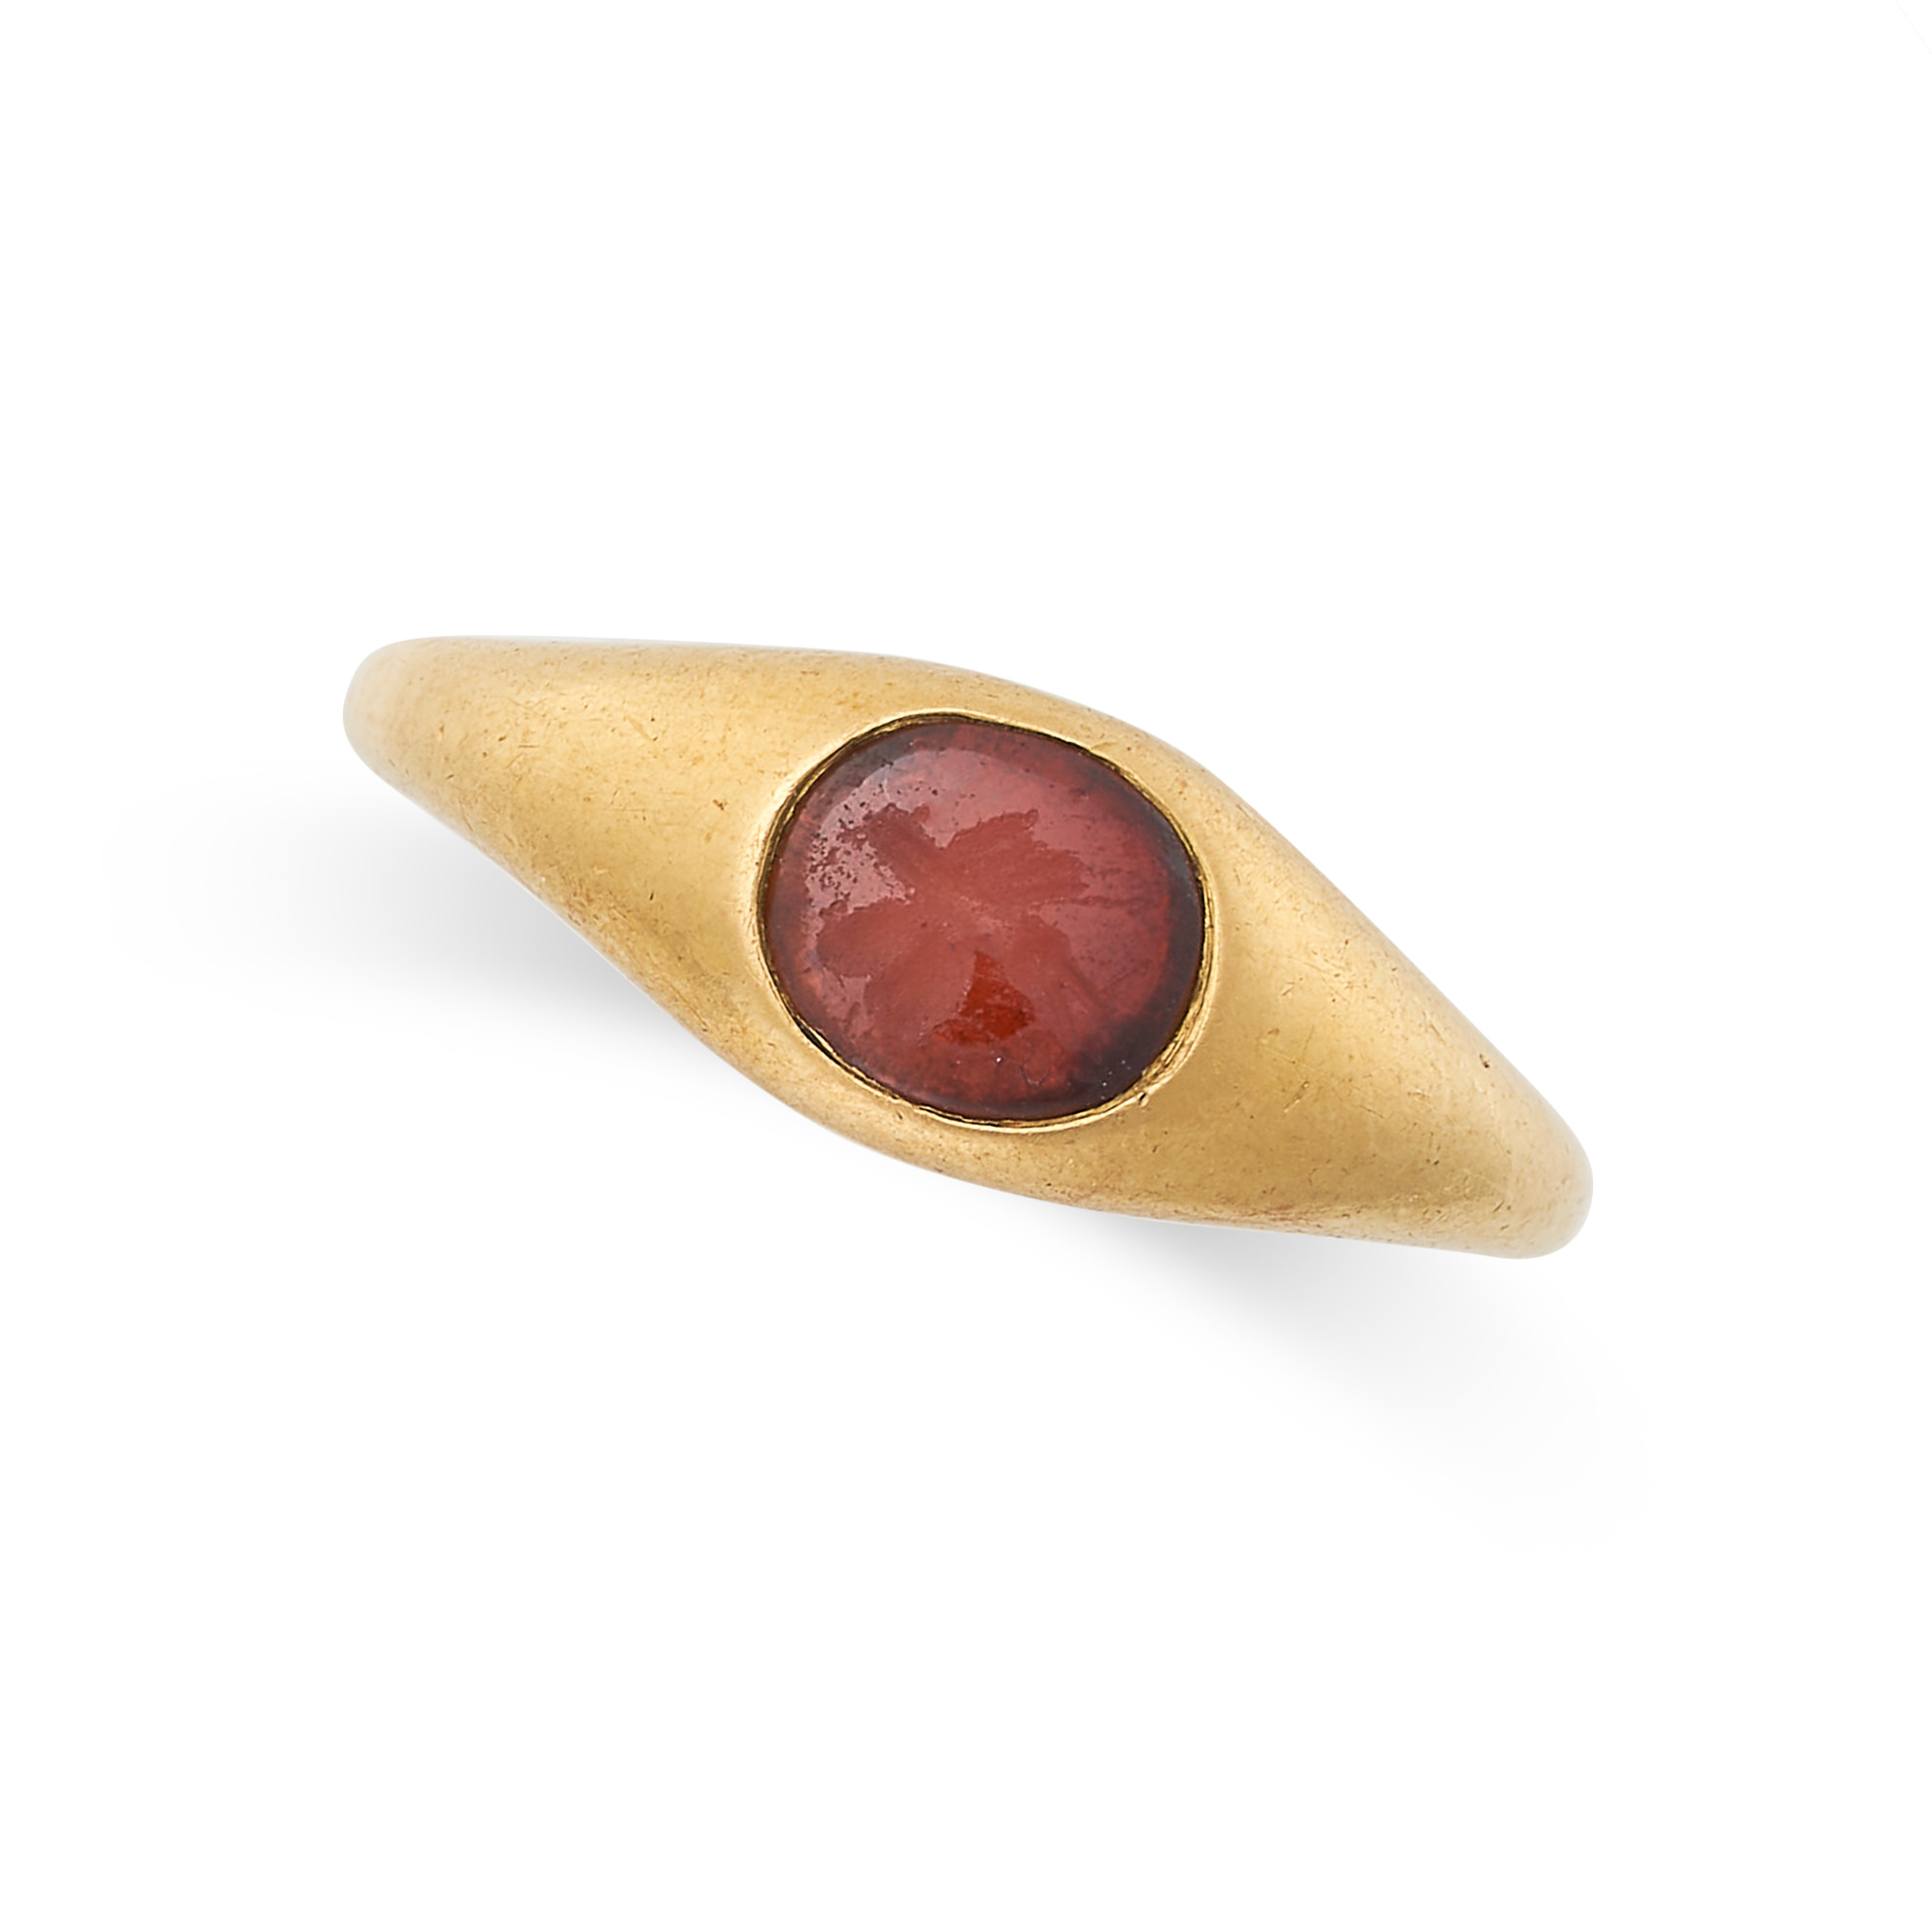 NO RESERVE - AN ANTIQUE RED GLASS INTAGLIO GYPSY RING, 19TH CENTURY in yellow gold, the tapering